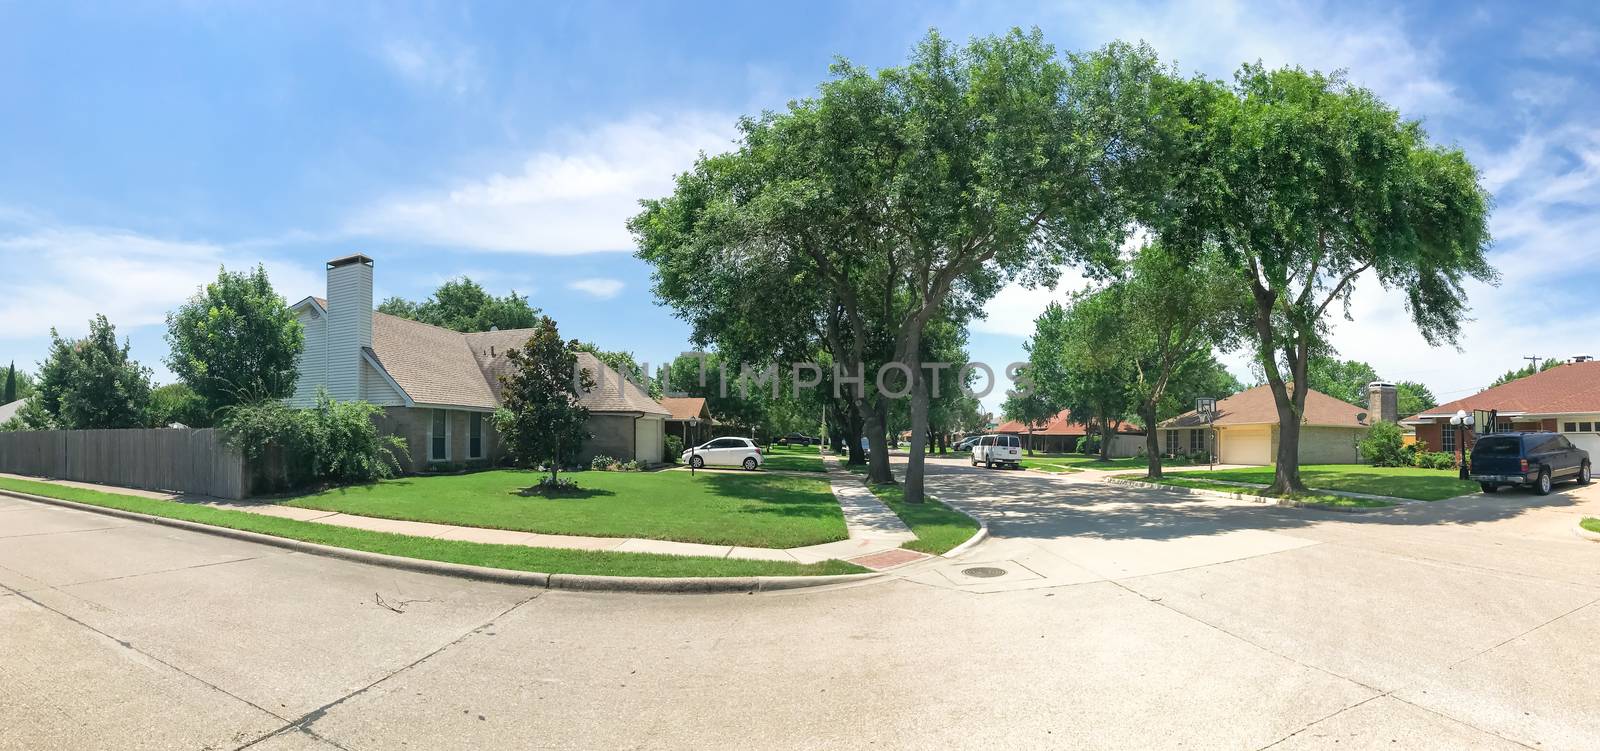 Panorama tall oak trees canopy street and bungalow style single-family detached house neighborhood in West of Dallas, Texas, USA. Summertime with cloud blue sky, cars on street, near sidewalk pathway